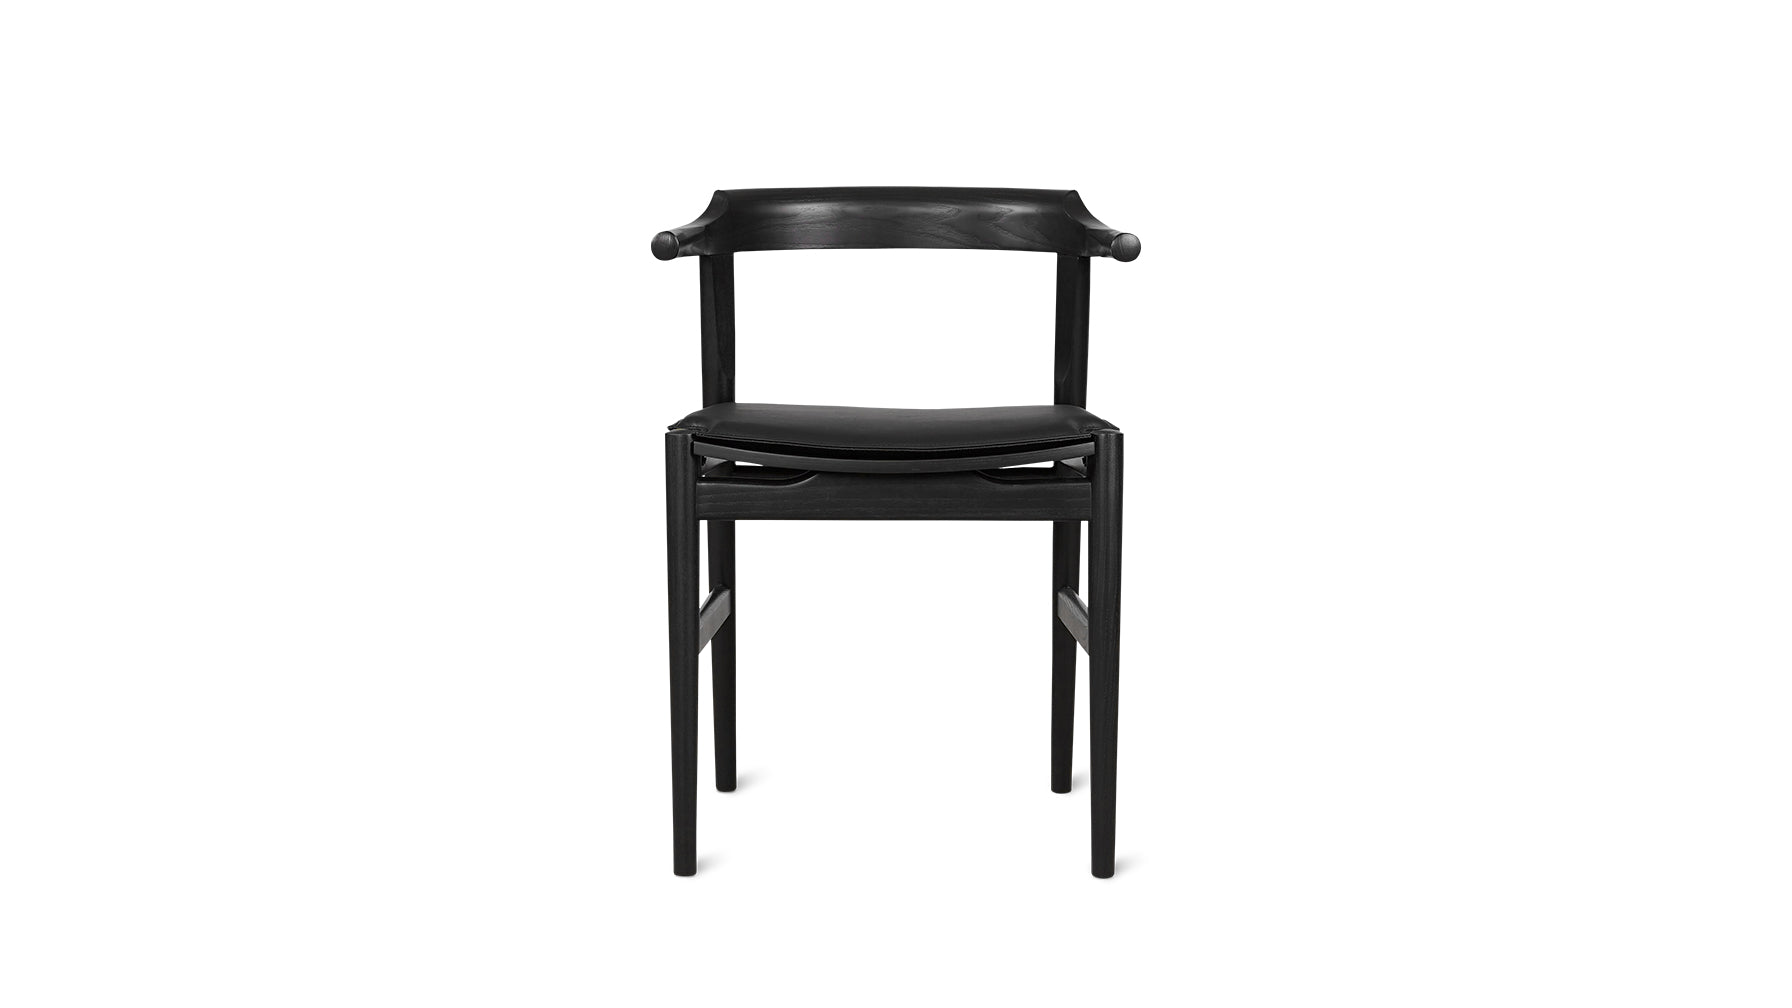 Tuck In Dining Chair with Cushion, Black Ash, Wood Seat with Black Cushion - Image 1